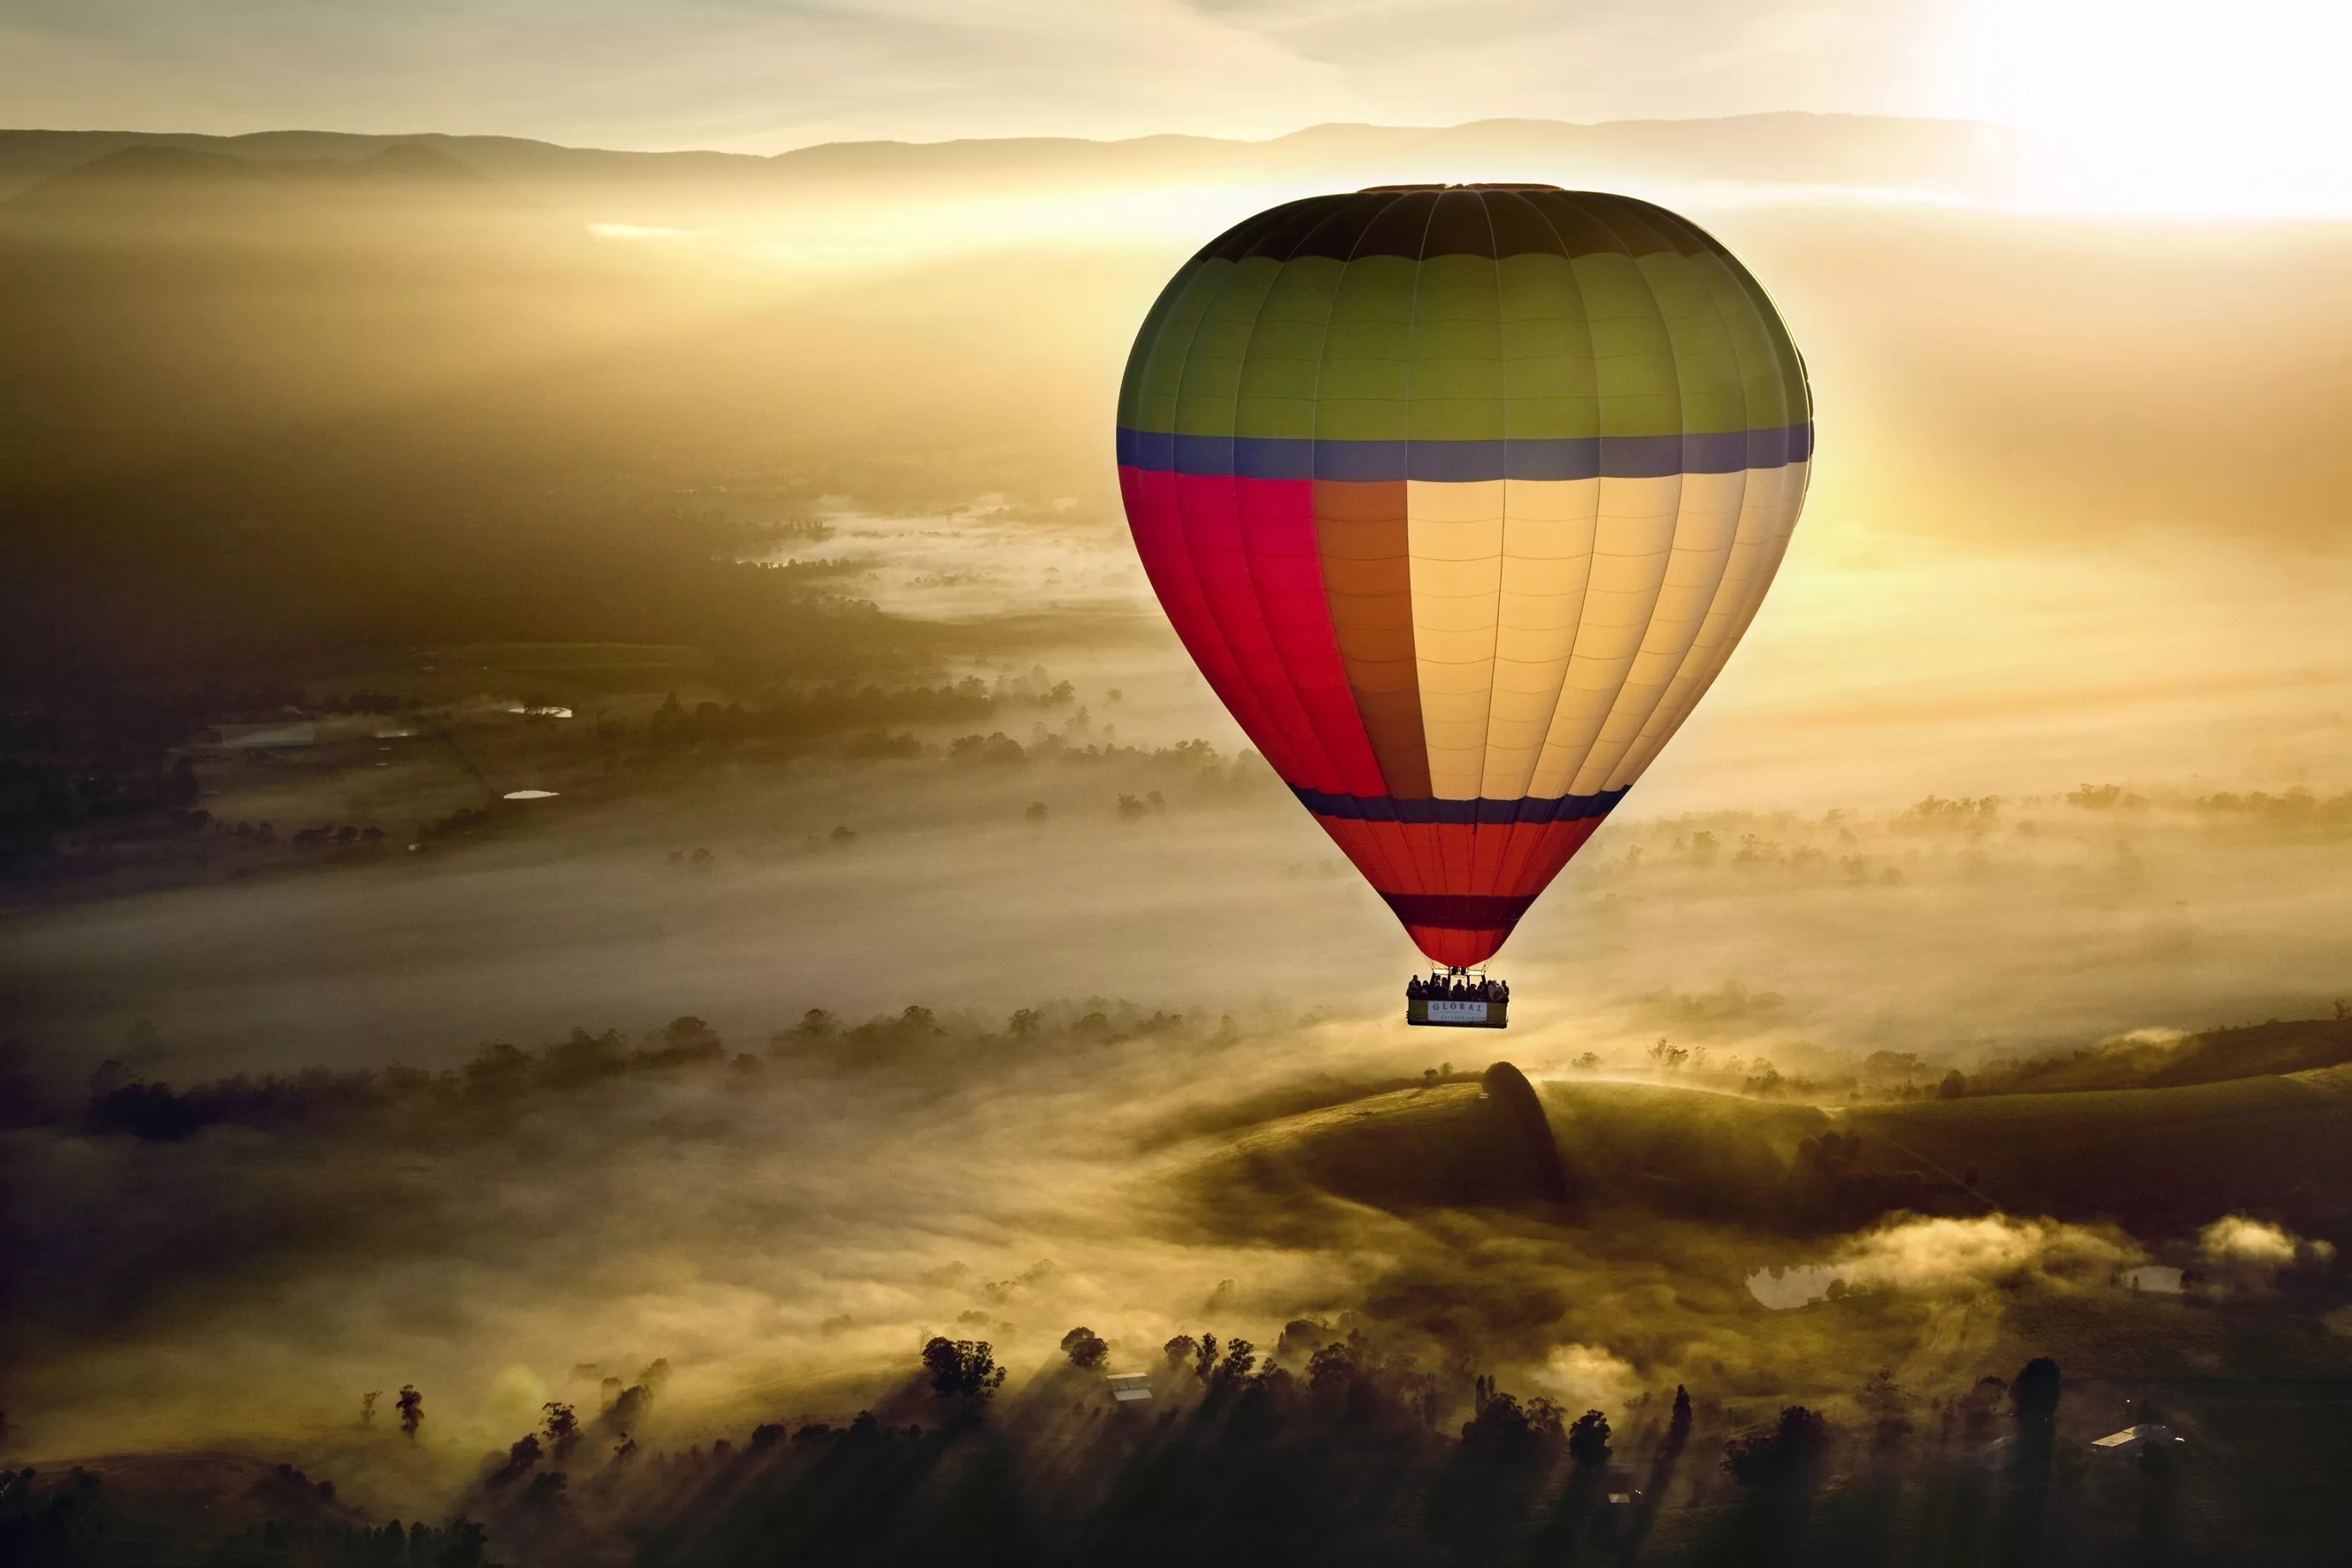 Picture This Ballooning - Melbourne in Australia, Australia and Oceania | Hot Air Ballooning - Rated 1.1